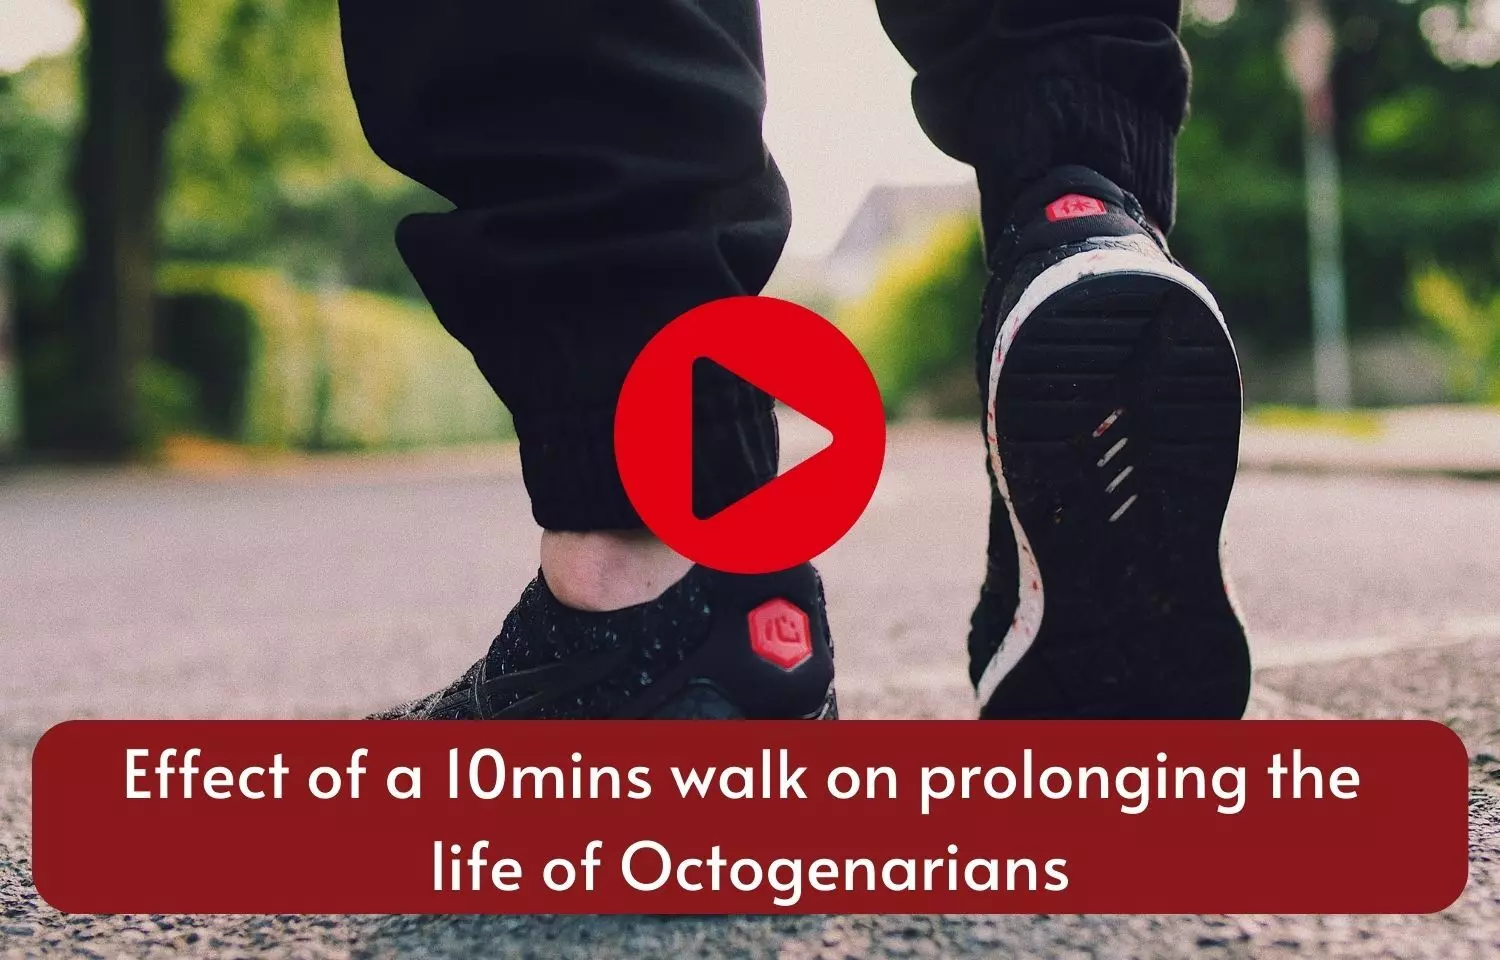 Effect of a 10mins walk on prolonging the life of Octogenarians